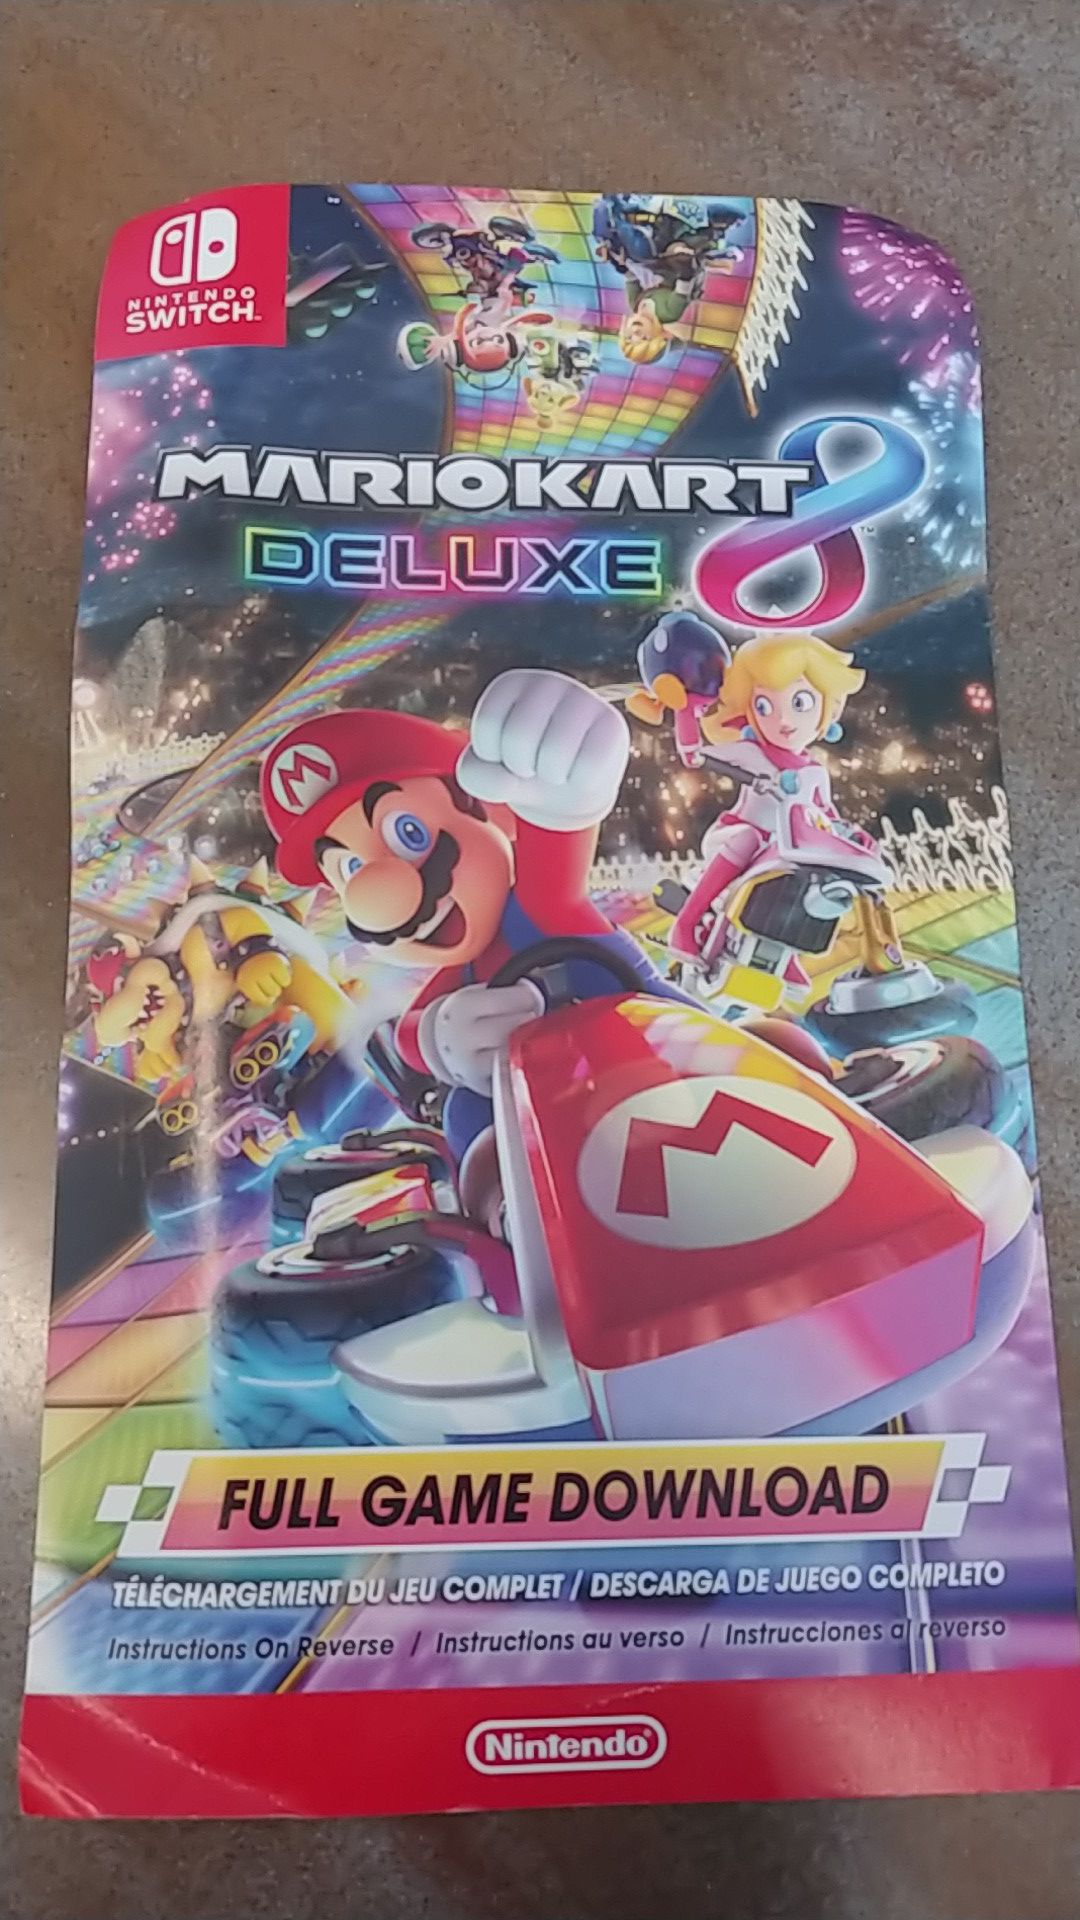 Mario kart 8 deluxe digital (switch) download trade for Sale in 